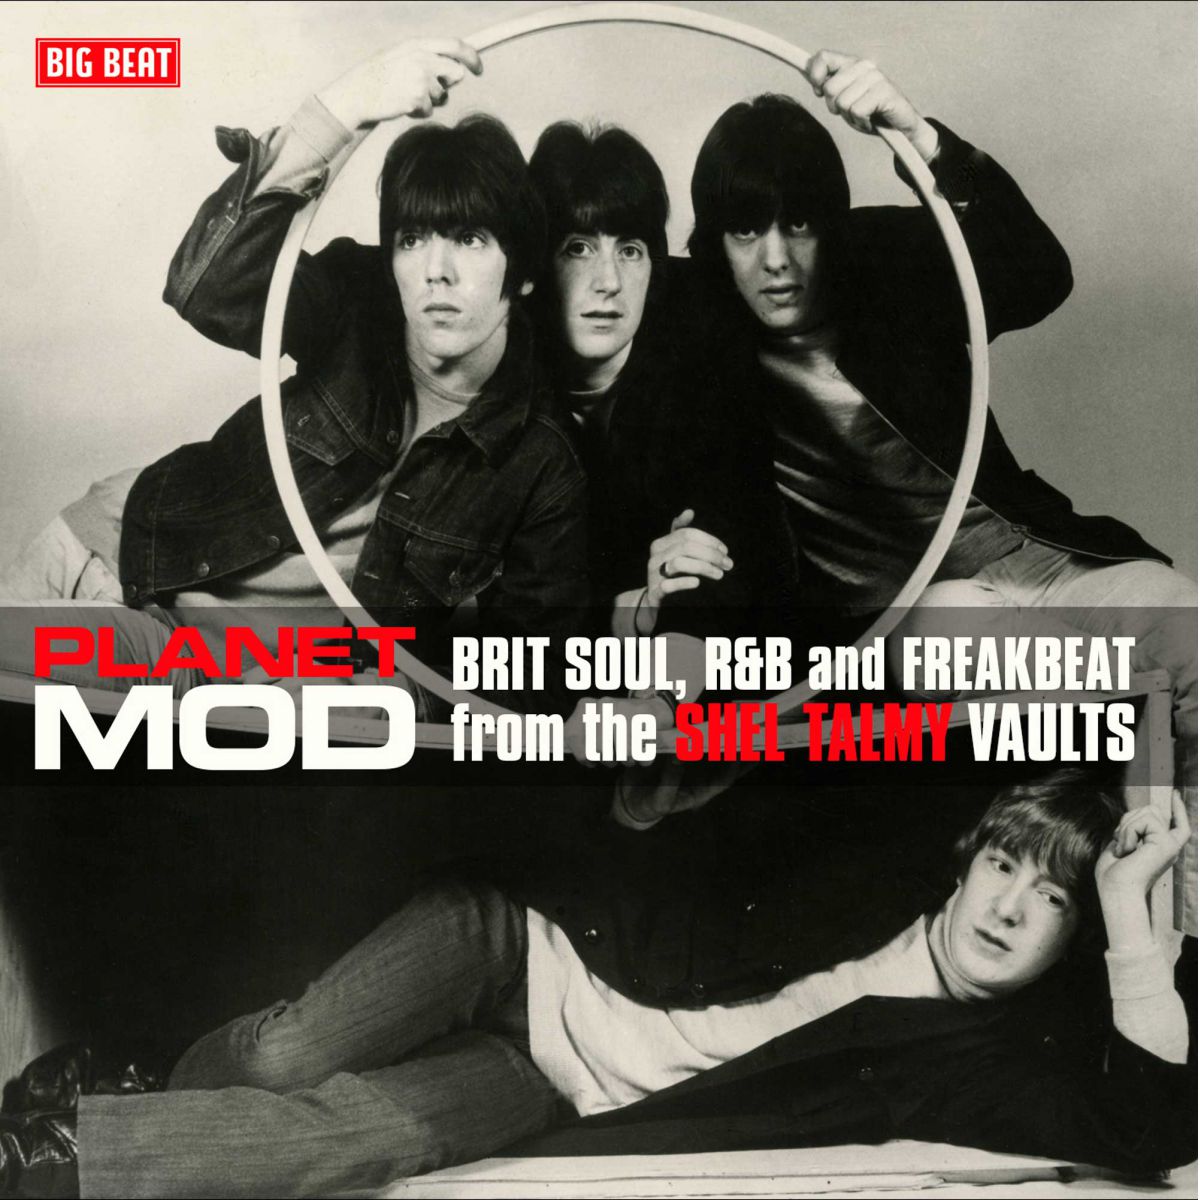 V.A.(PLANET MOD BRIT SOUL, R&B AND FREAKBEAT FROM THE SHEL TALMY VAULTS) / PLANET MOD BRIT SOUL, R&B AND FREAKBEAT FROM THE SHEL TALMY VAULTS(CD)